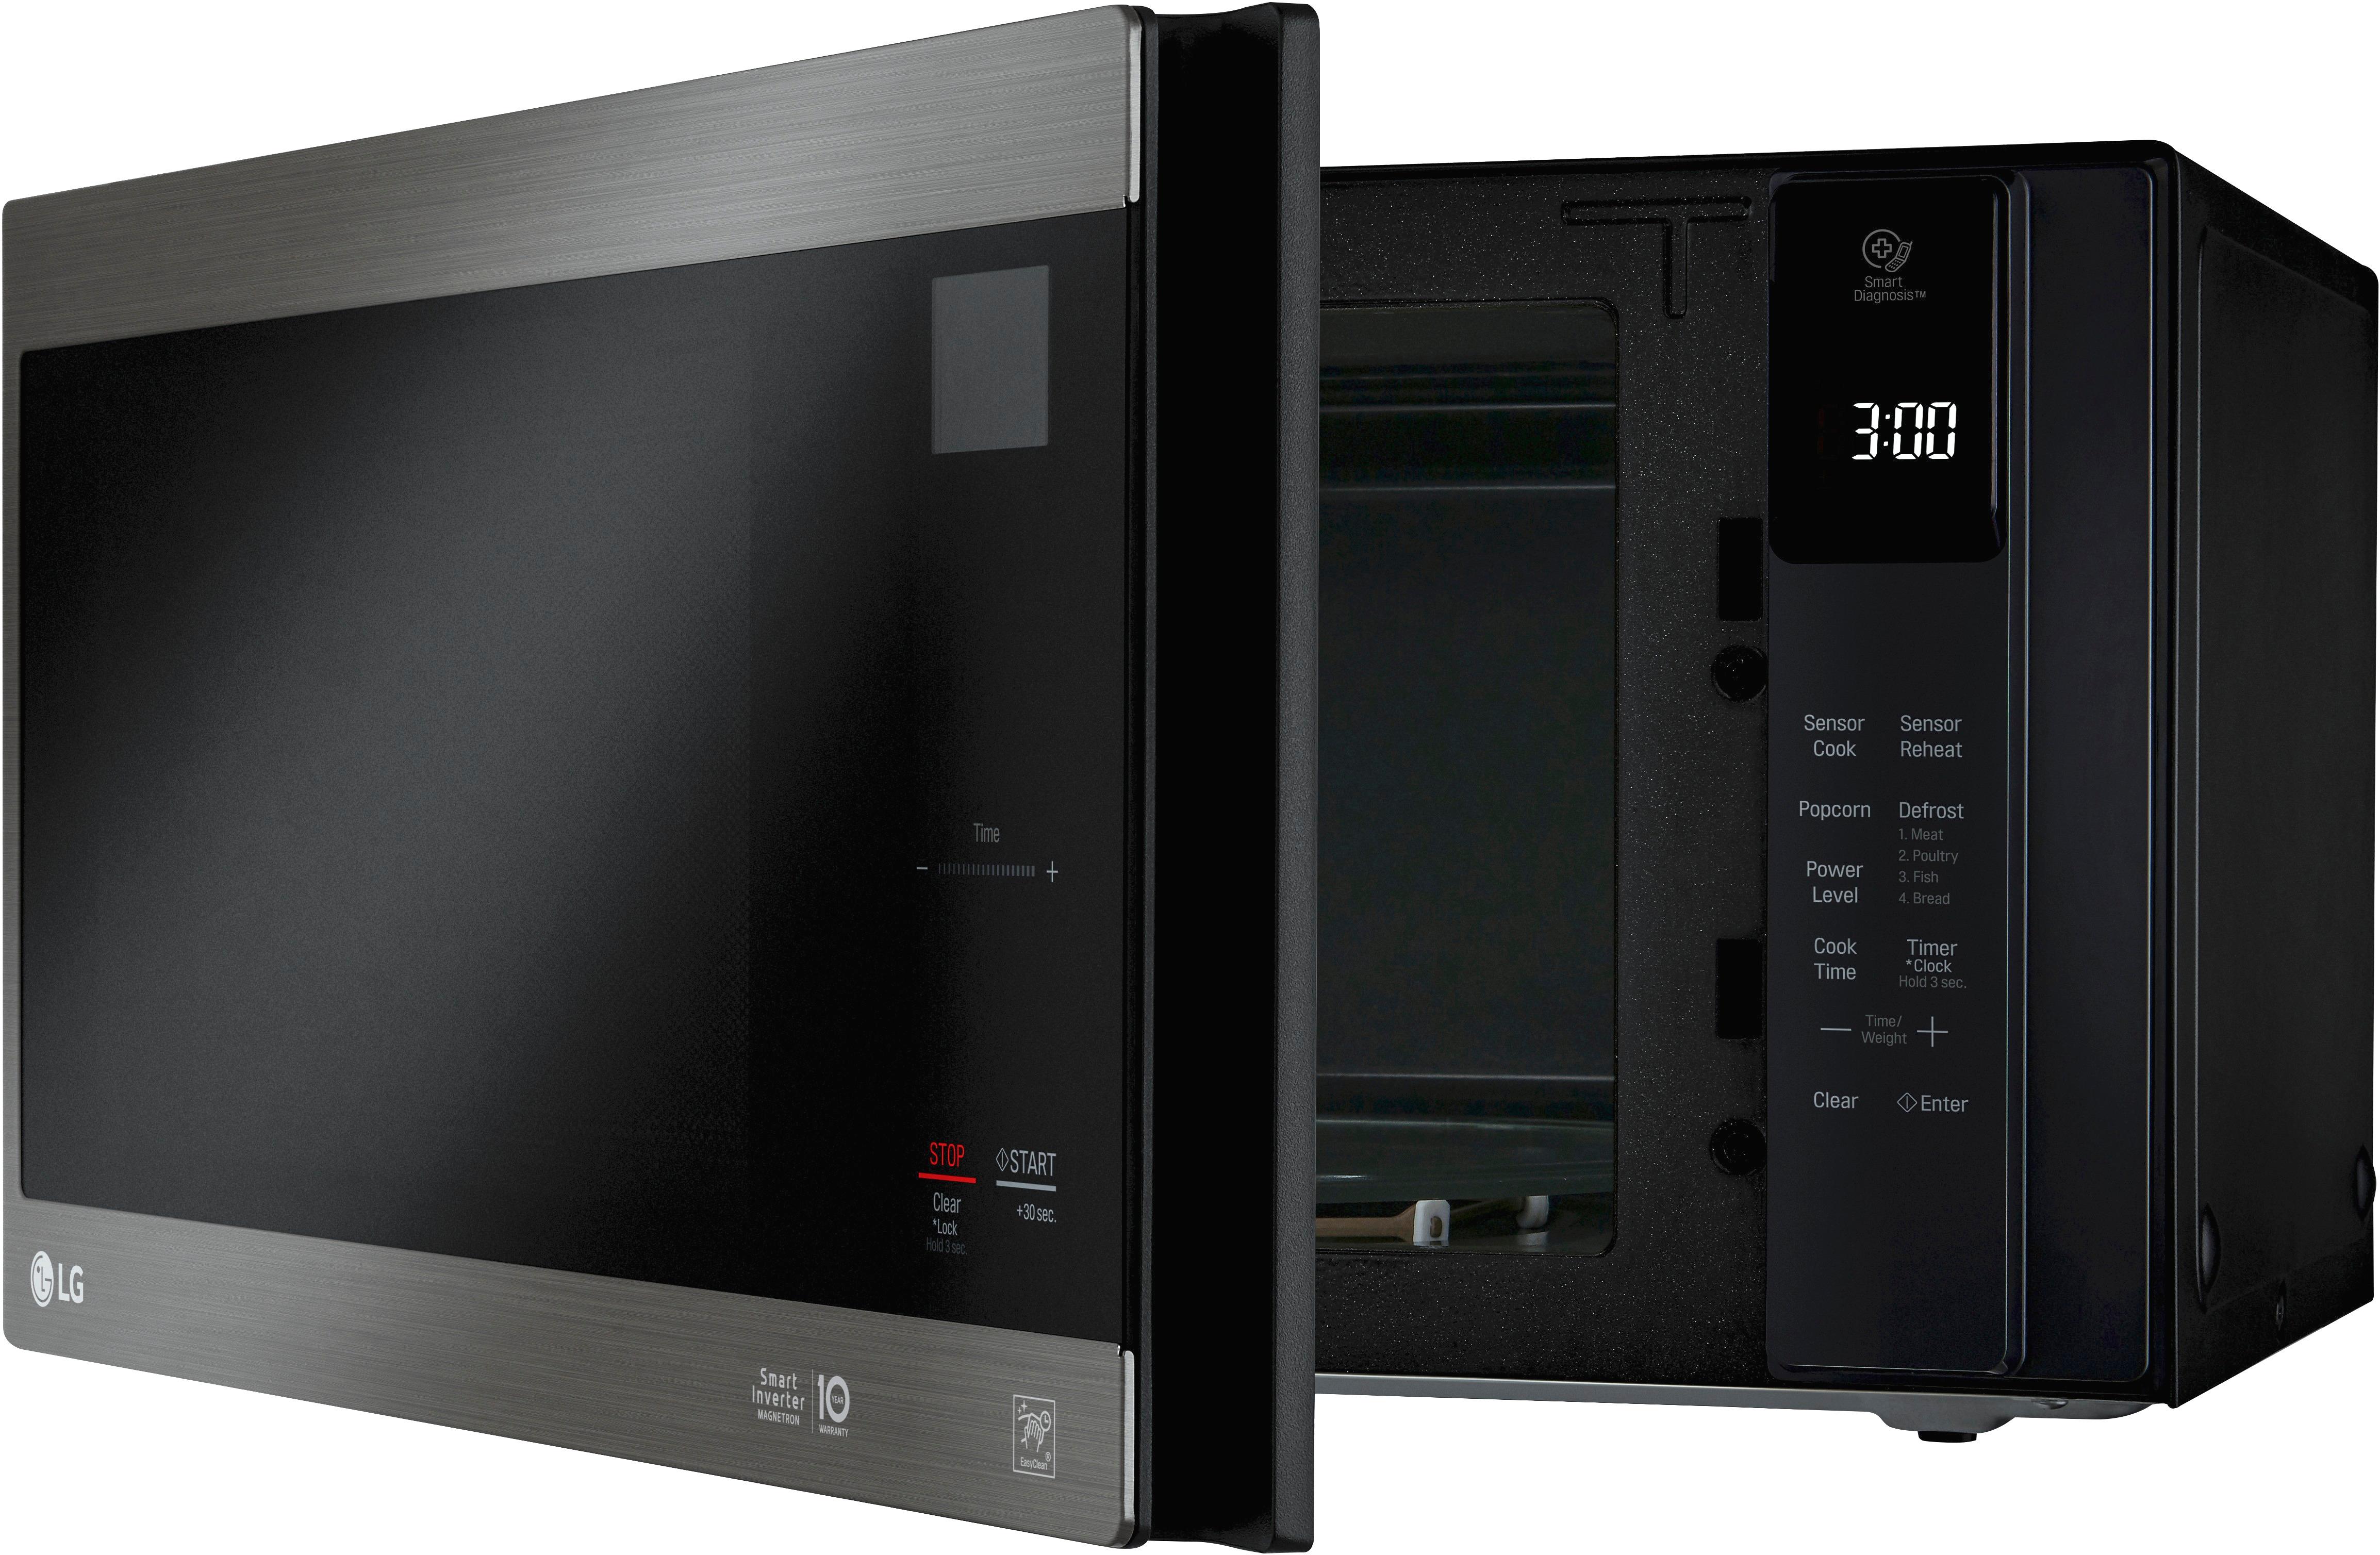 LG NeoChef 1.5 Cu. Ft. Mid-Size Microwave Black stainless steel